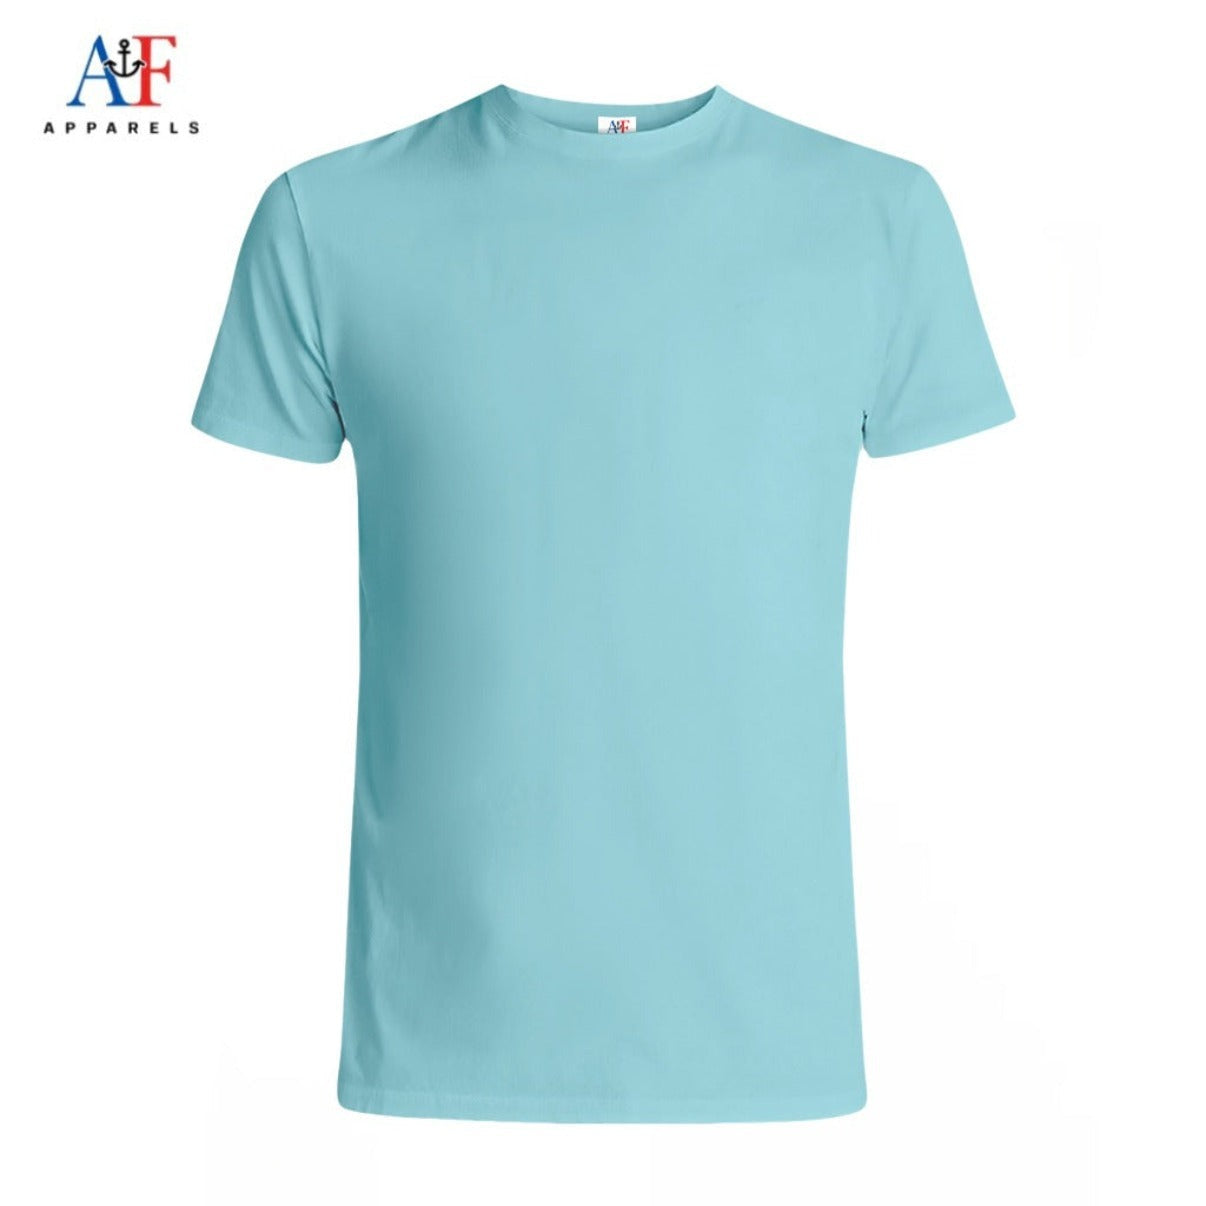 1007-Youth Premium Tee - Pacific blue - AF APPARELS(USA)